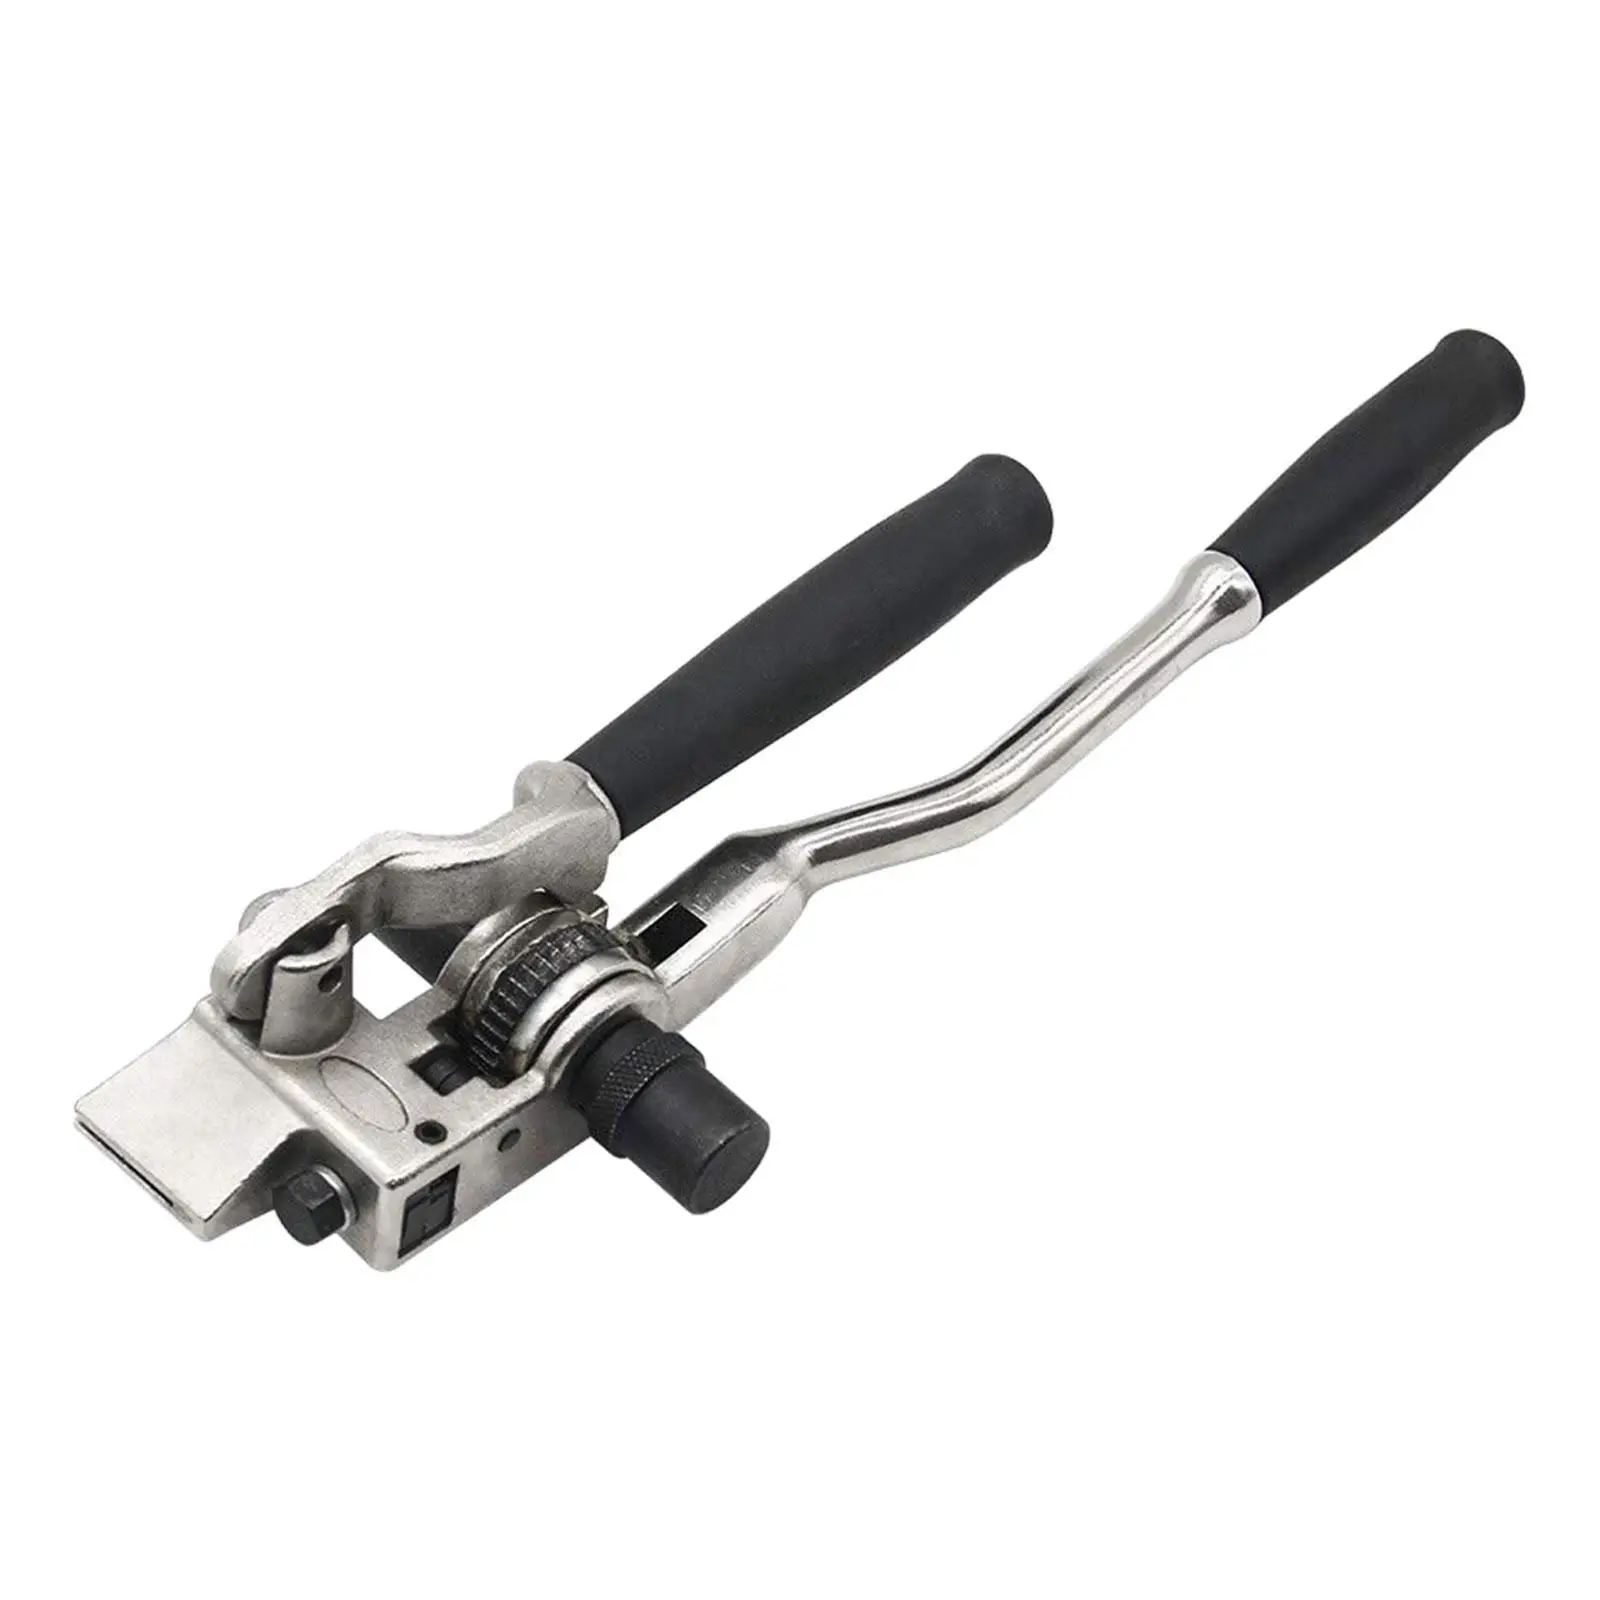 Strapping Tensioner Cable Tie Pliers for Cutting Stainless Steel Cable Ties